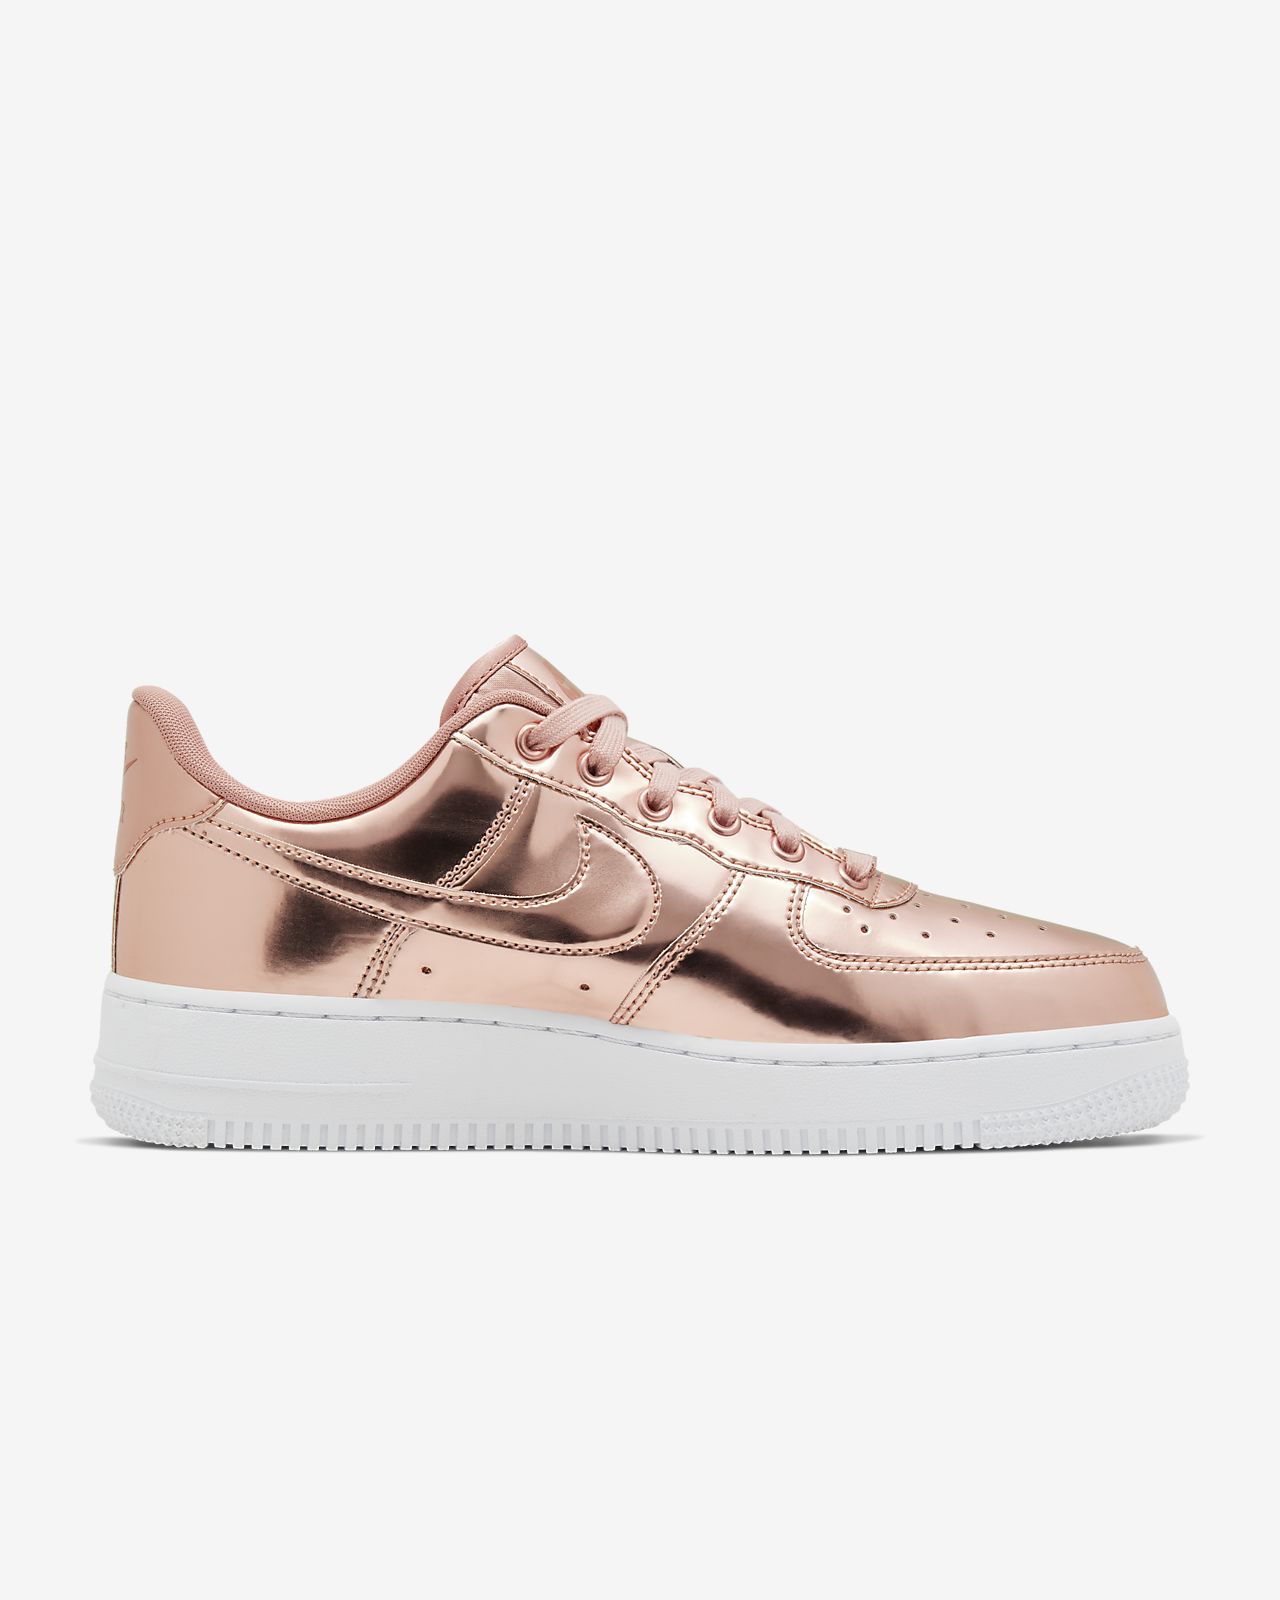 nike wmns air force 1 sp